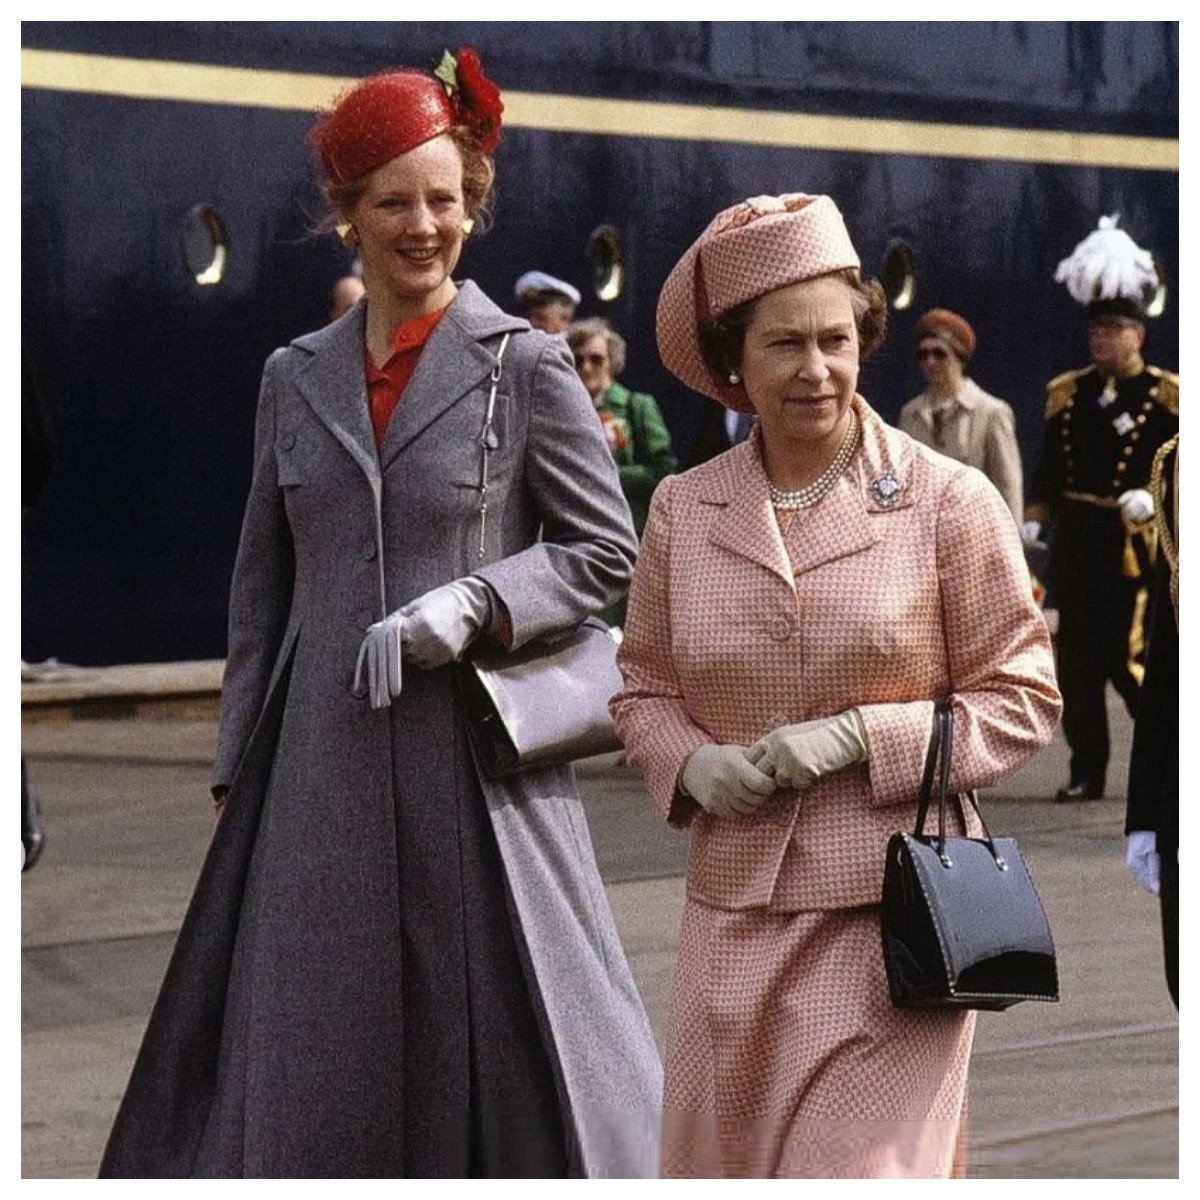 Queen Margrethe of Denmark and the late Queen Elizabeth go back a long way. Photo: @royallerblogu/Instagram